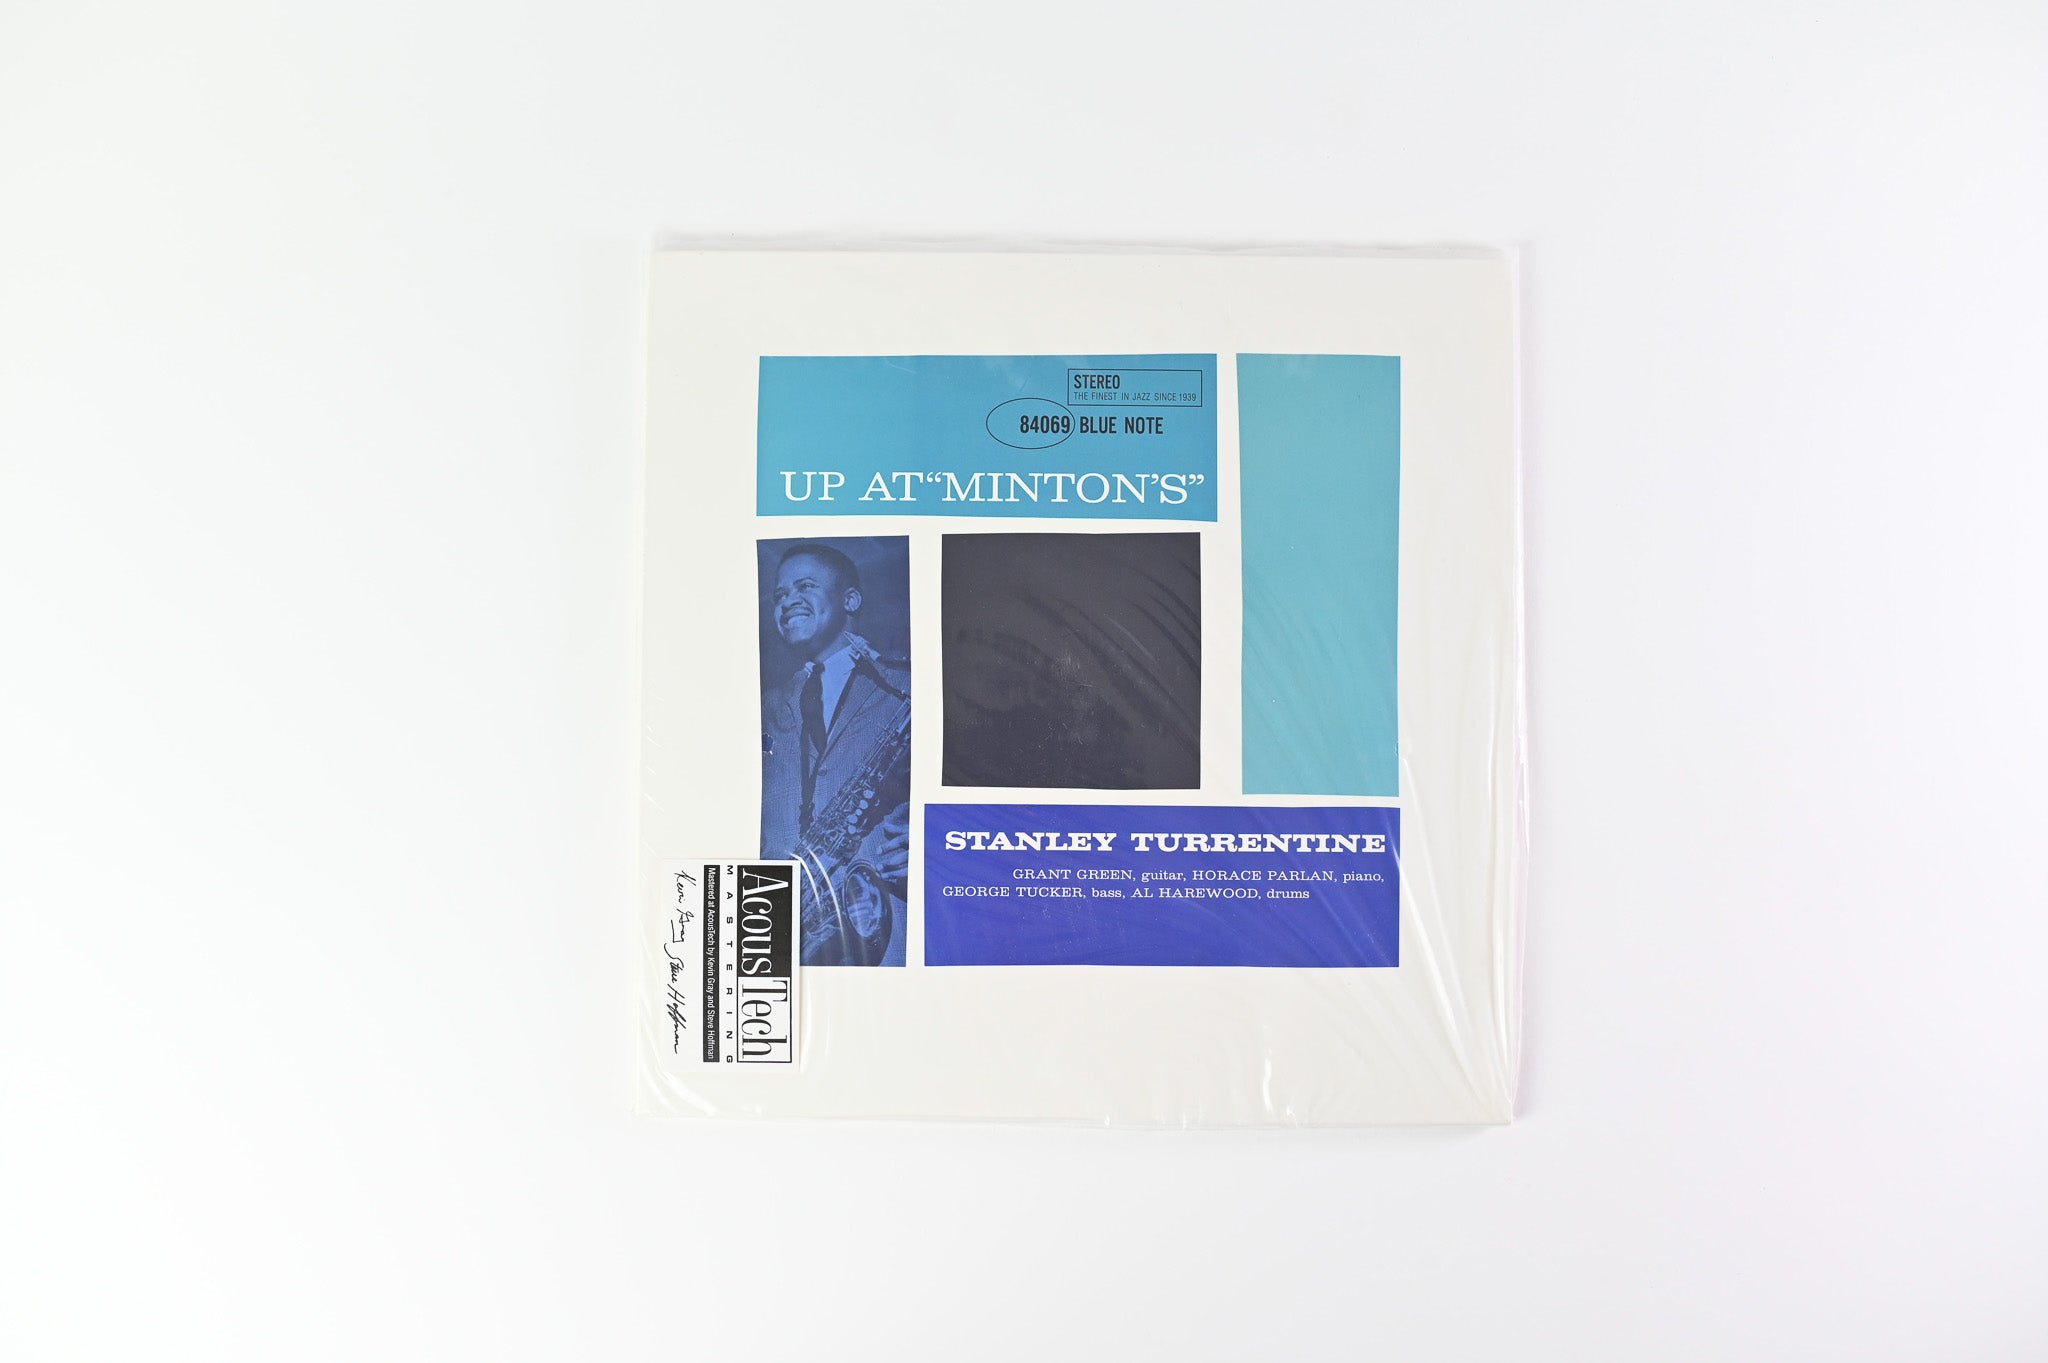 Stanley Turrentine - Up At "Minton's", Vol. 1 on Blue Note Analogue Productions Numbered Reissue 45 RPM